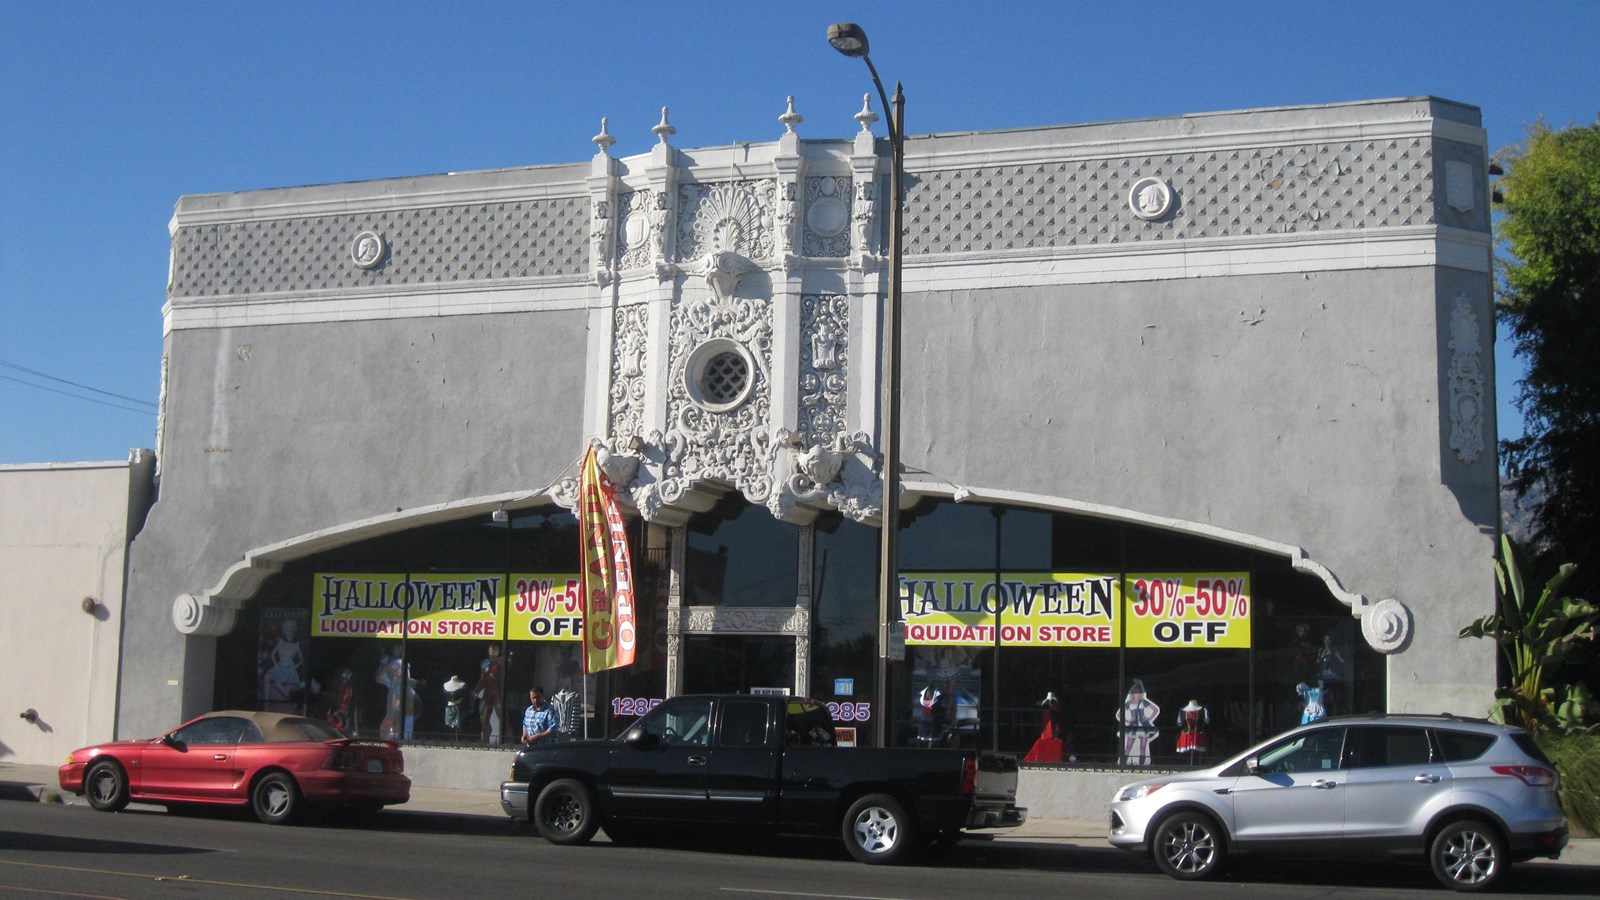 A grey and white tall building with ornate detailing. 